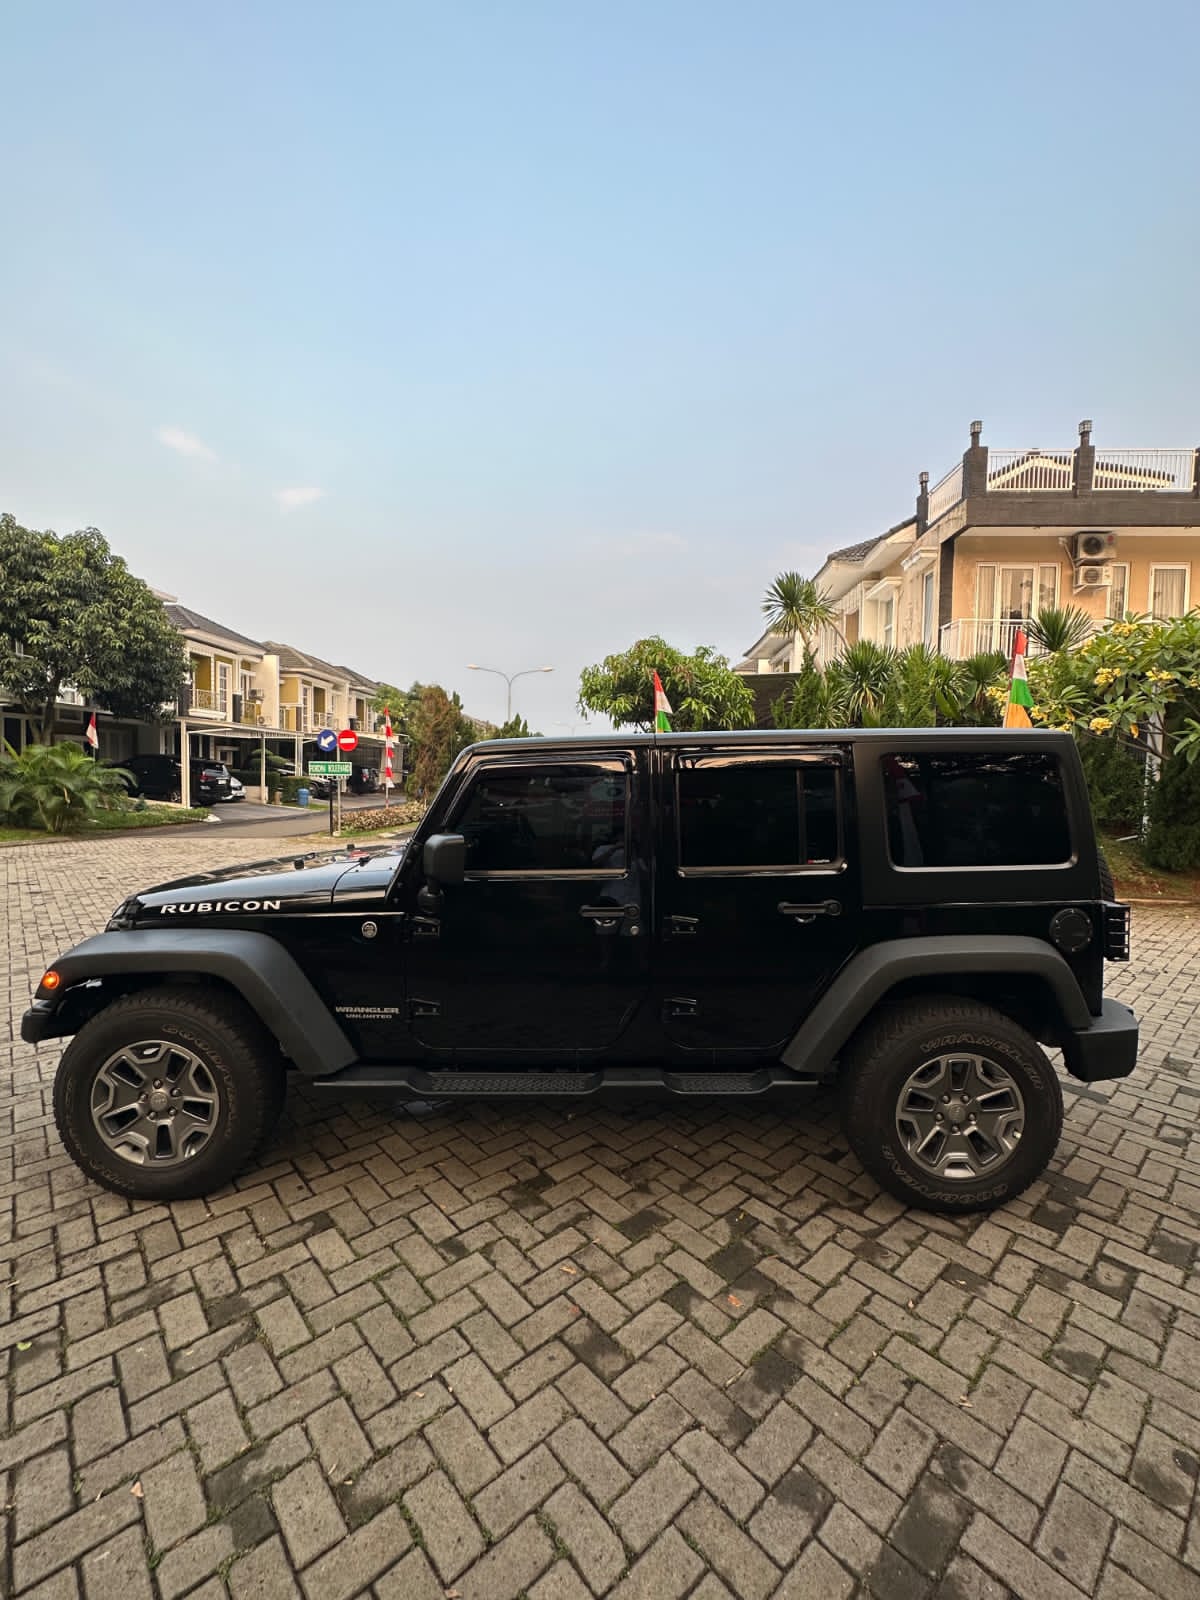 Used 2014 Jeep Wrangler Rubicon 3.6L AT 4 D 3.6L AT 4 D for sale